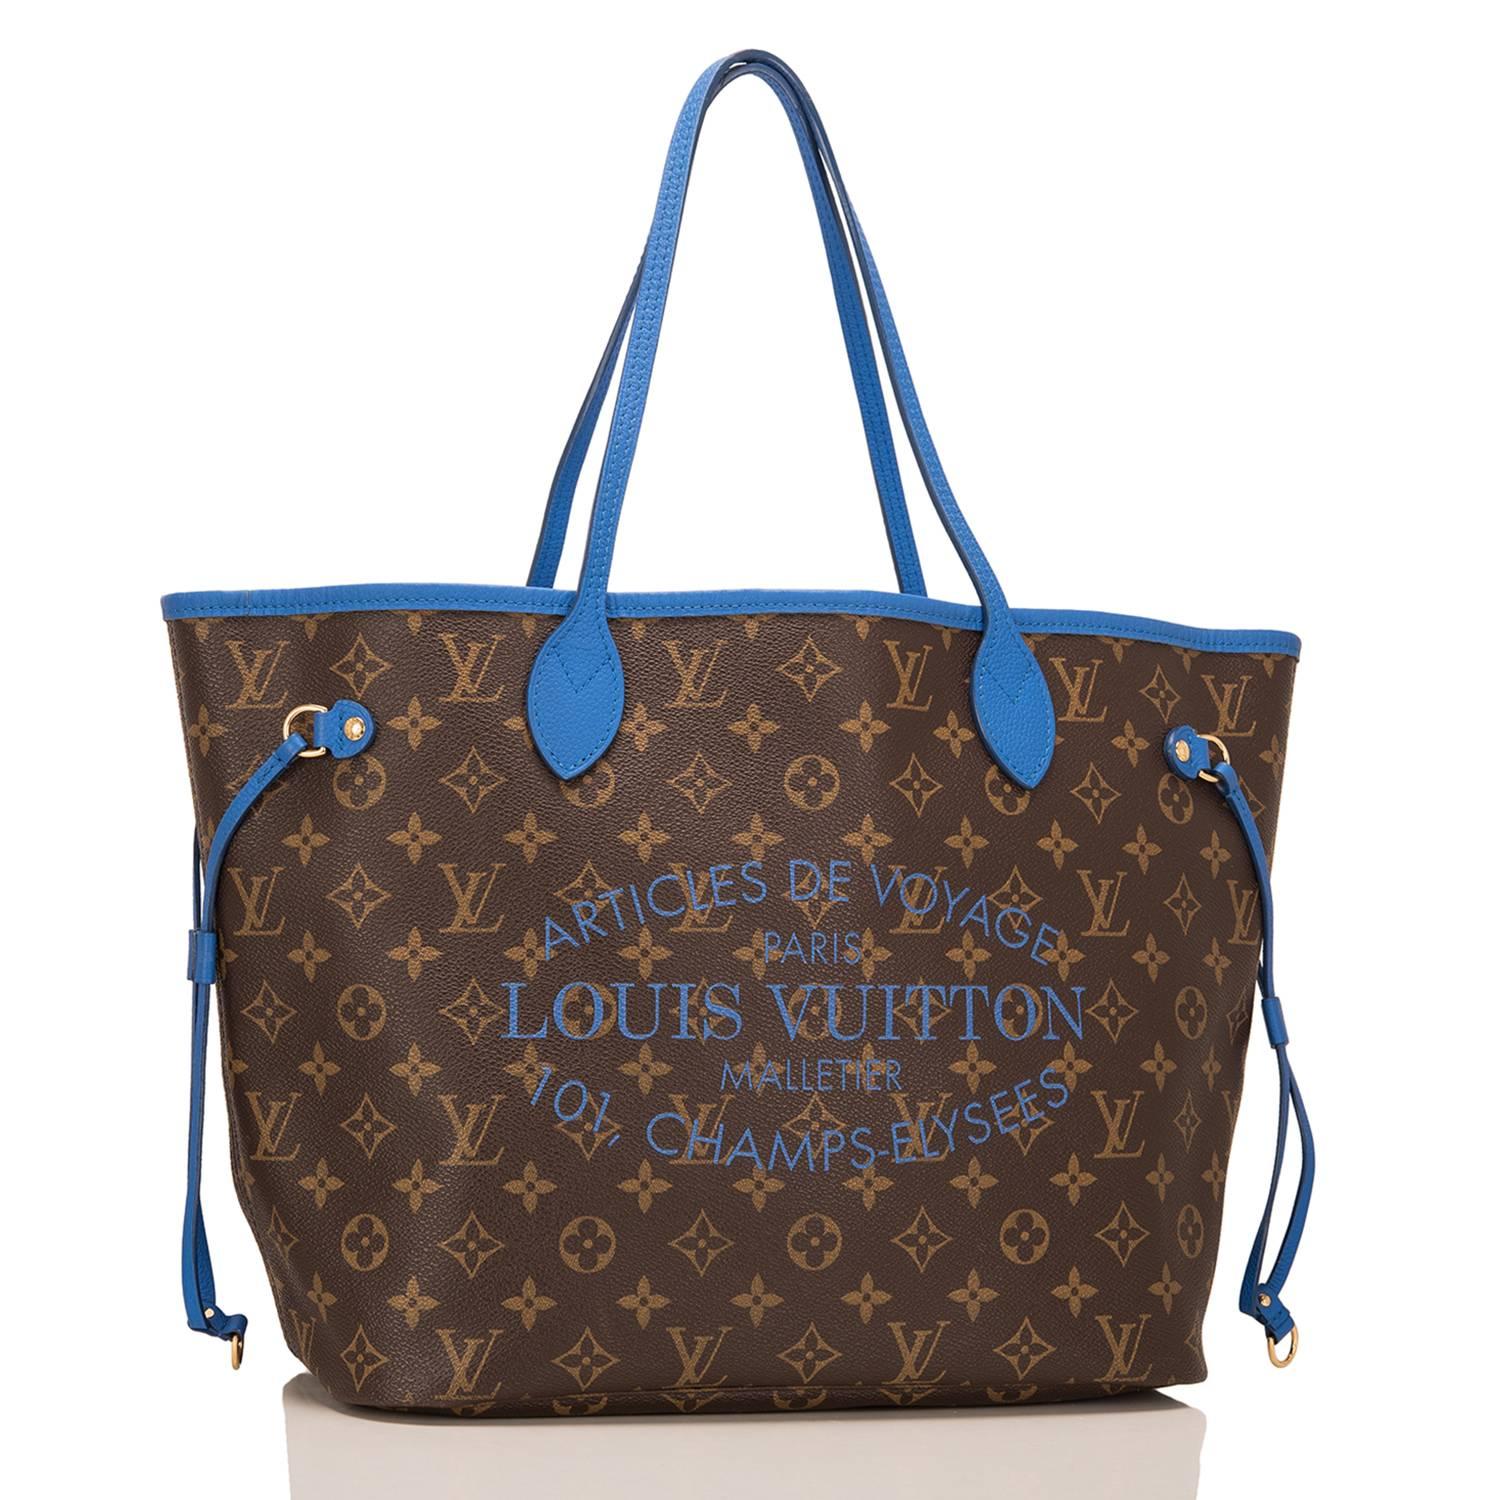 Louis Vuitton limited edition Articles De Voyage Ikat Neverfull MM in Grand Bleu.

This classic tote is made of Louis Vuitton Monogram coated canvas with Articles De Voyage and Louis Vuitton silk screened on front side in Grand Bleu, Grand Bleu